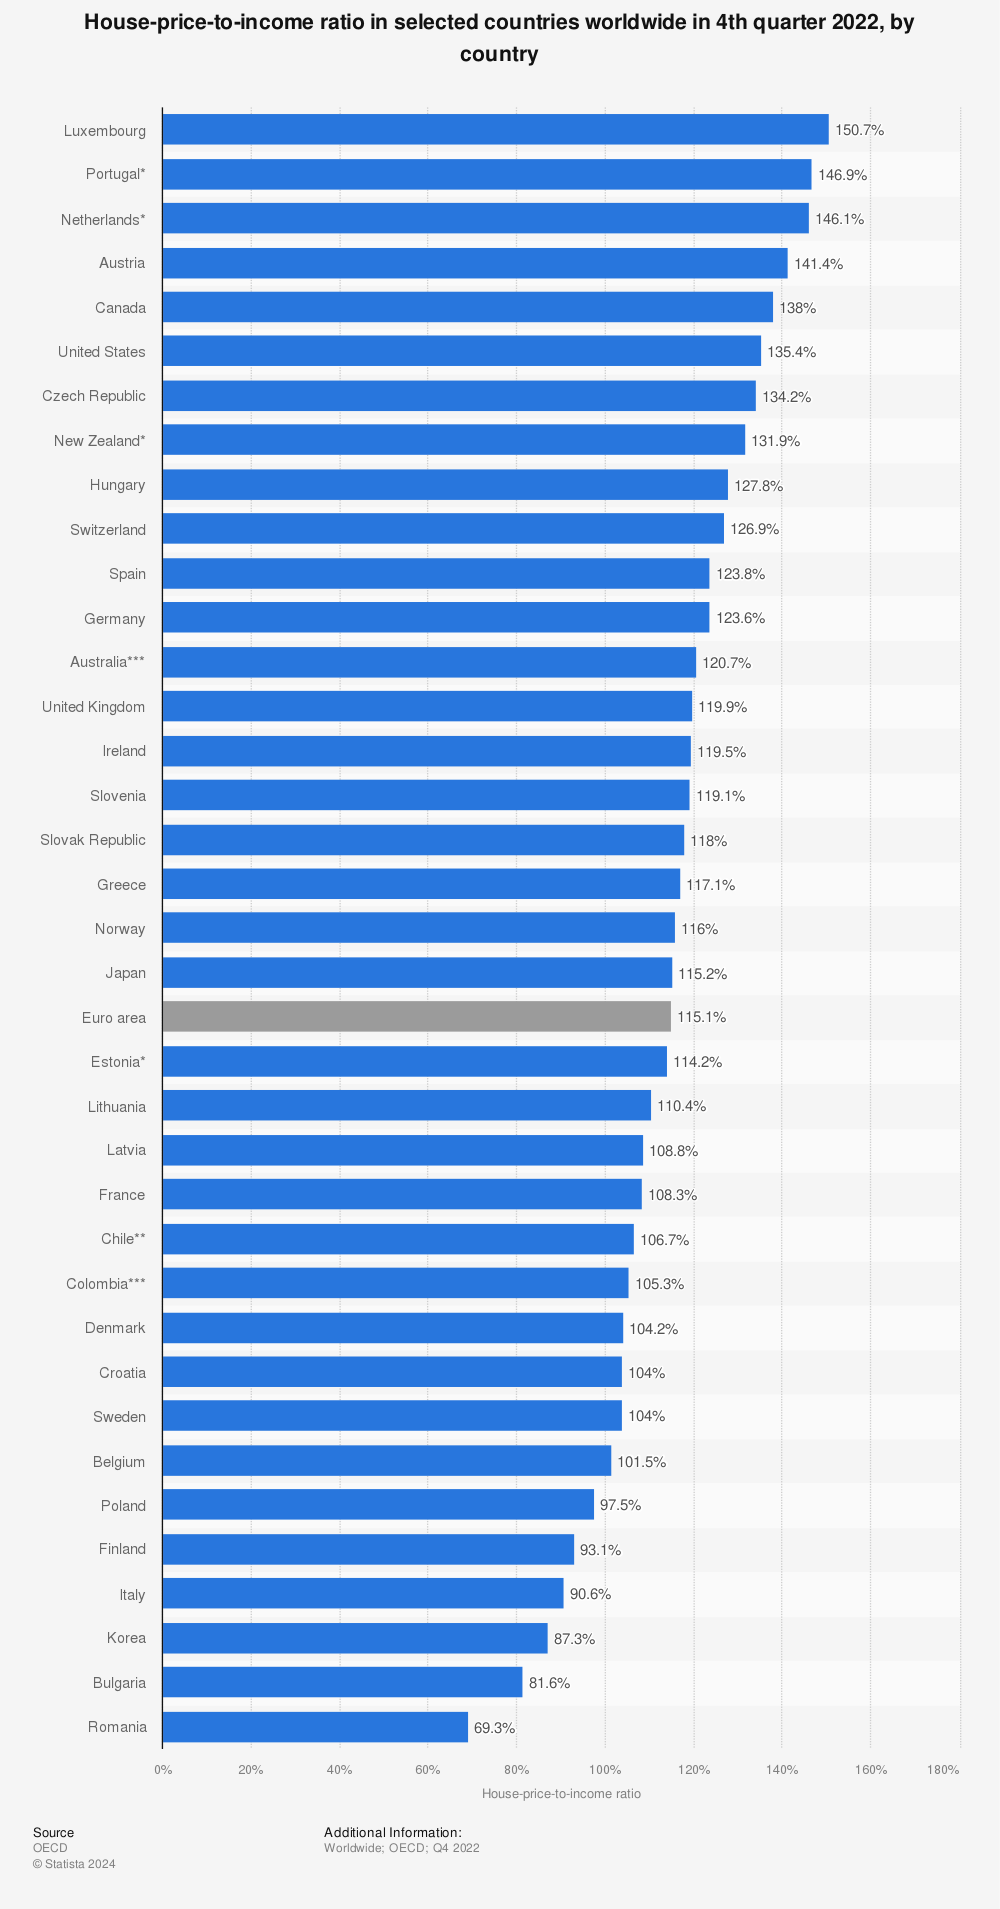  House-price-to-income ratio in selected countries worldwide as of 3rd quarter 2021, by country | Statista